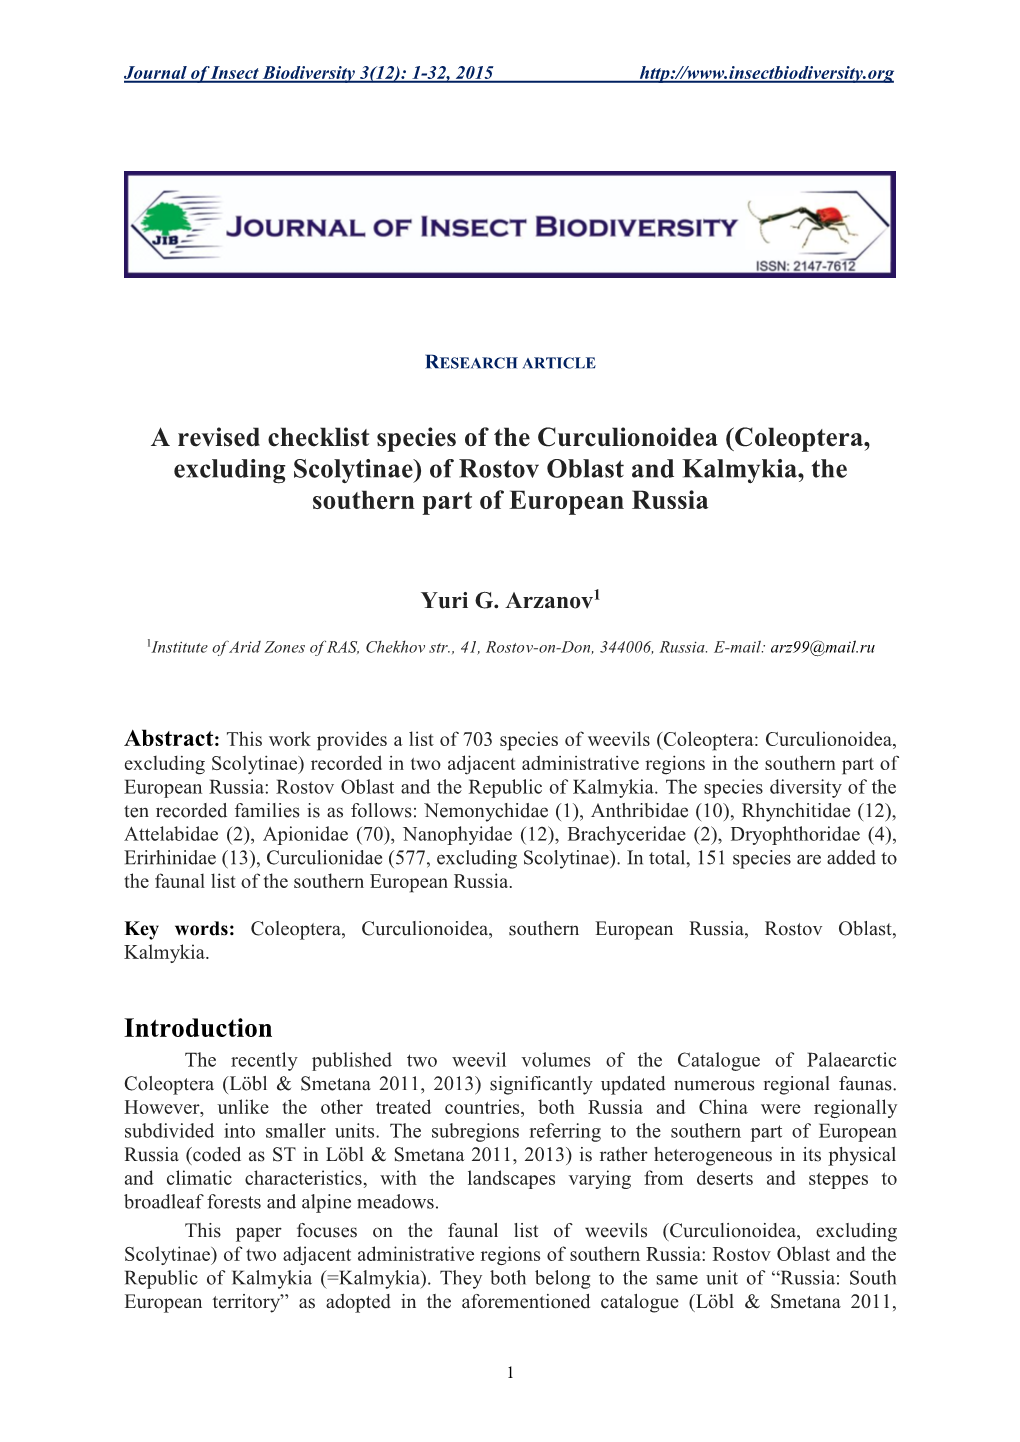 A Revised Checklist Species of the Curculionoidea (Coleoptera, Excluding Scolytinae) of Rostov Oblast and Kalmykia, the Southern Part of European Russia